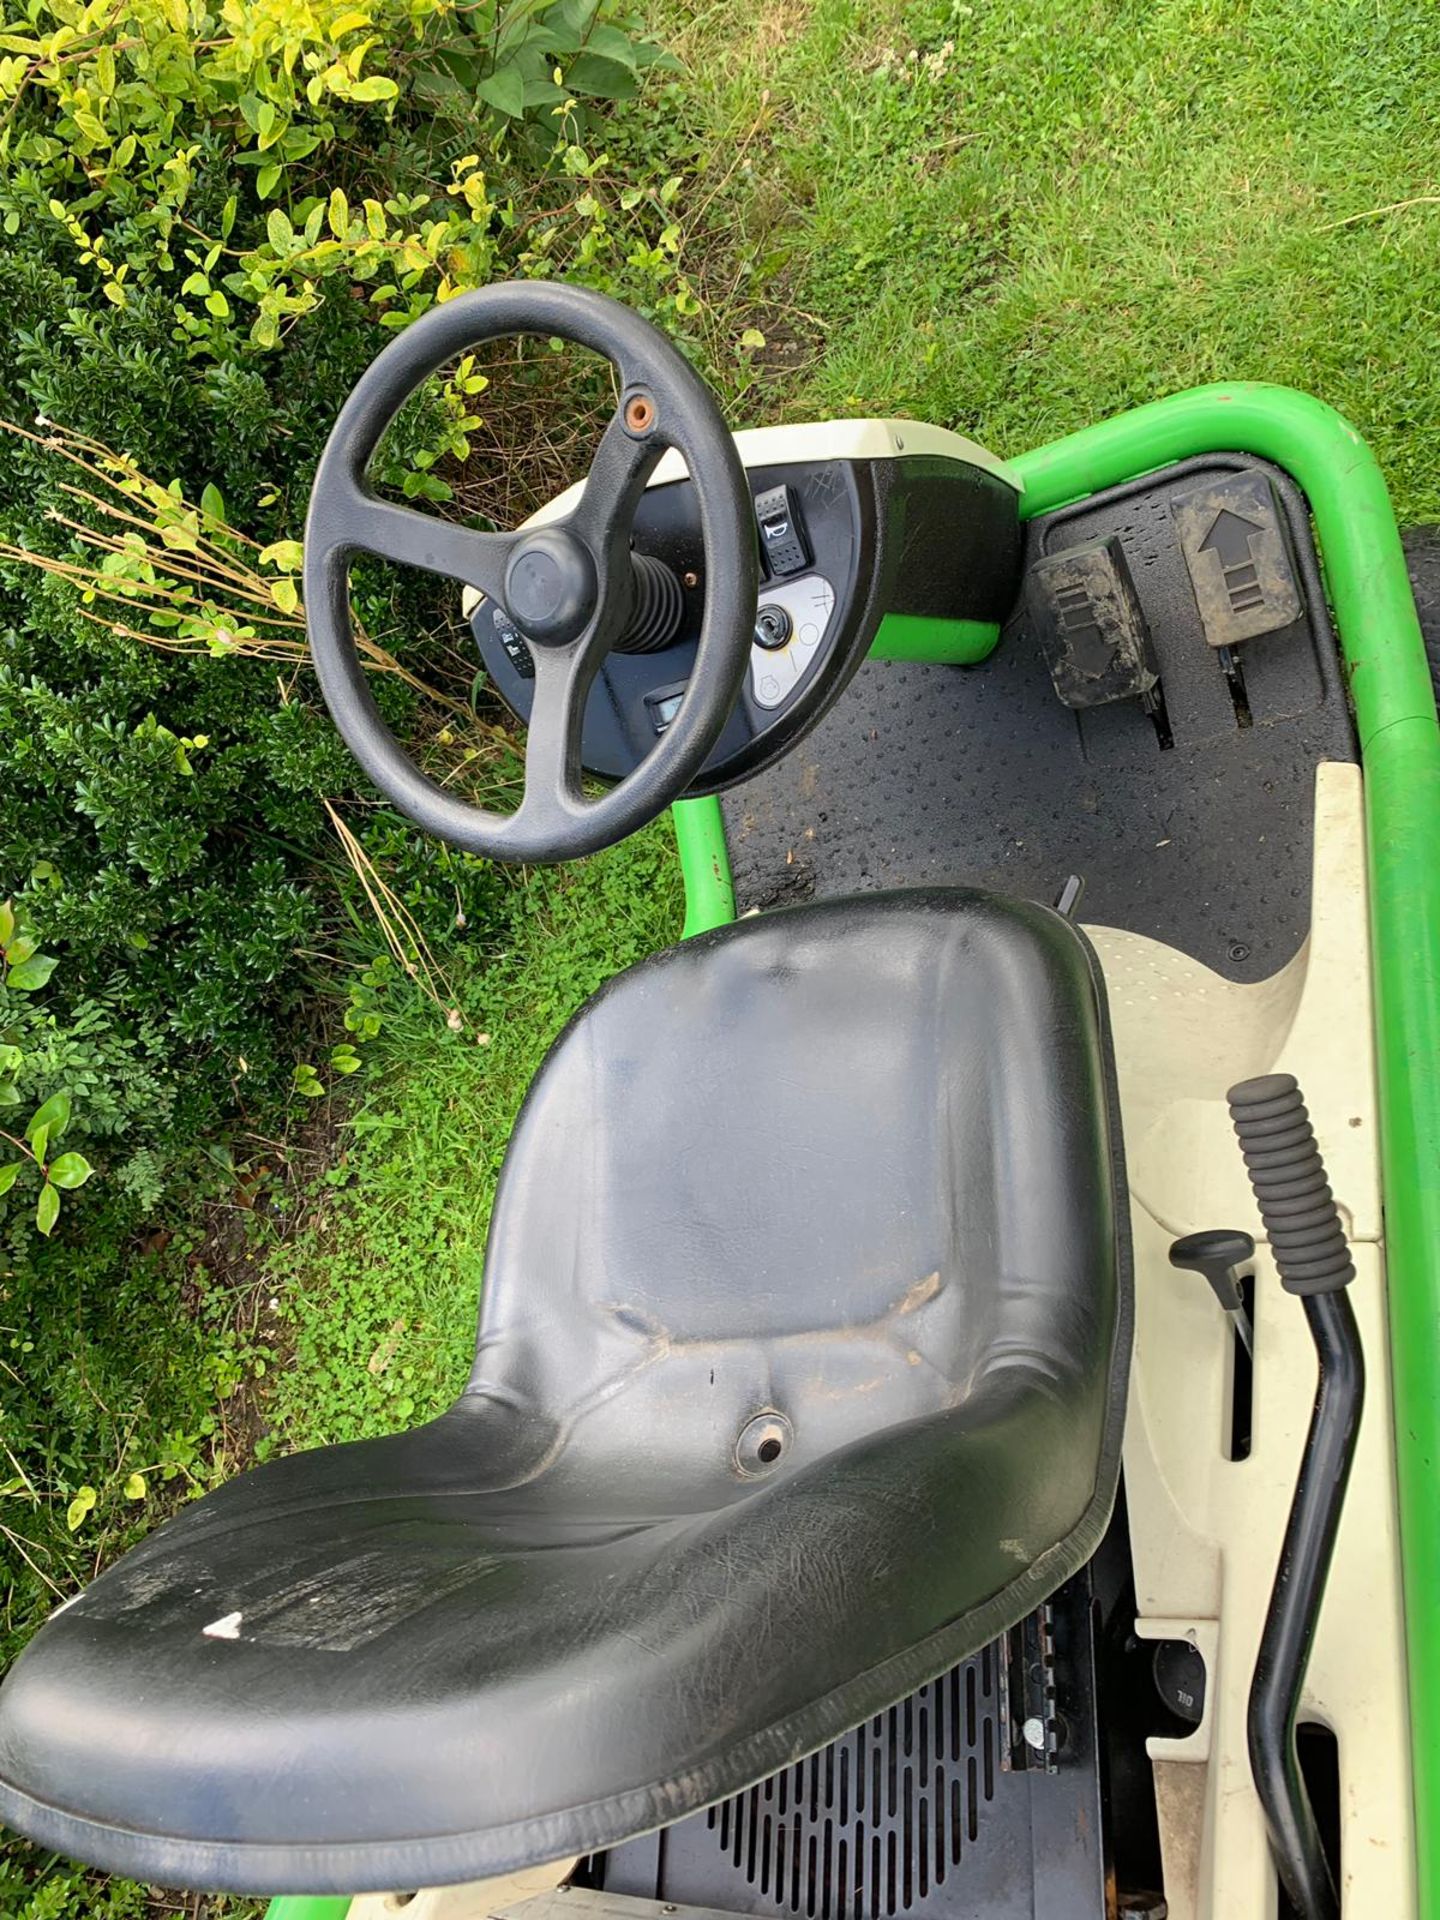 2015 ETESIA HYDRO 80 MKHP 3 RIDE ON LAWN MOWER, 240 KG, 11.9 KW, RUNS AND WORKS *PLUS VAT* - Image 7 of 9